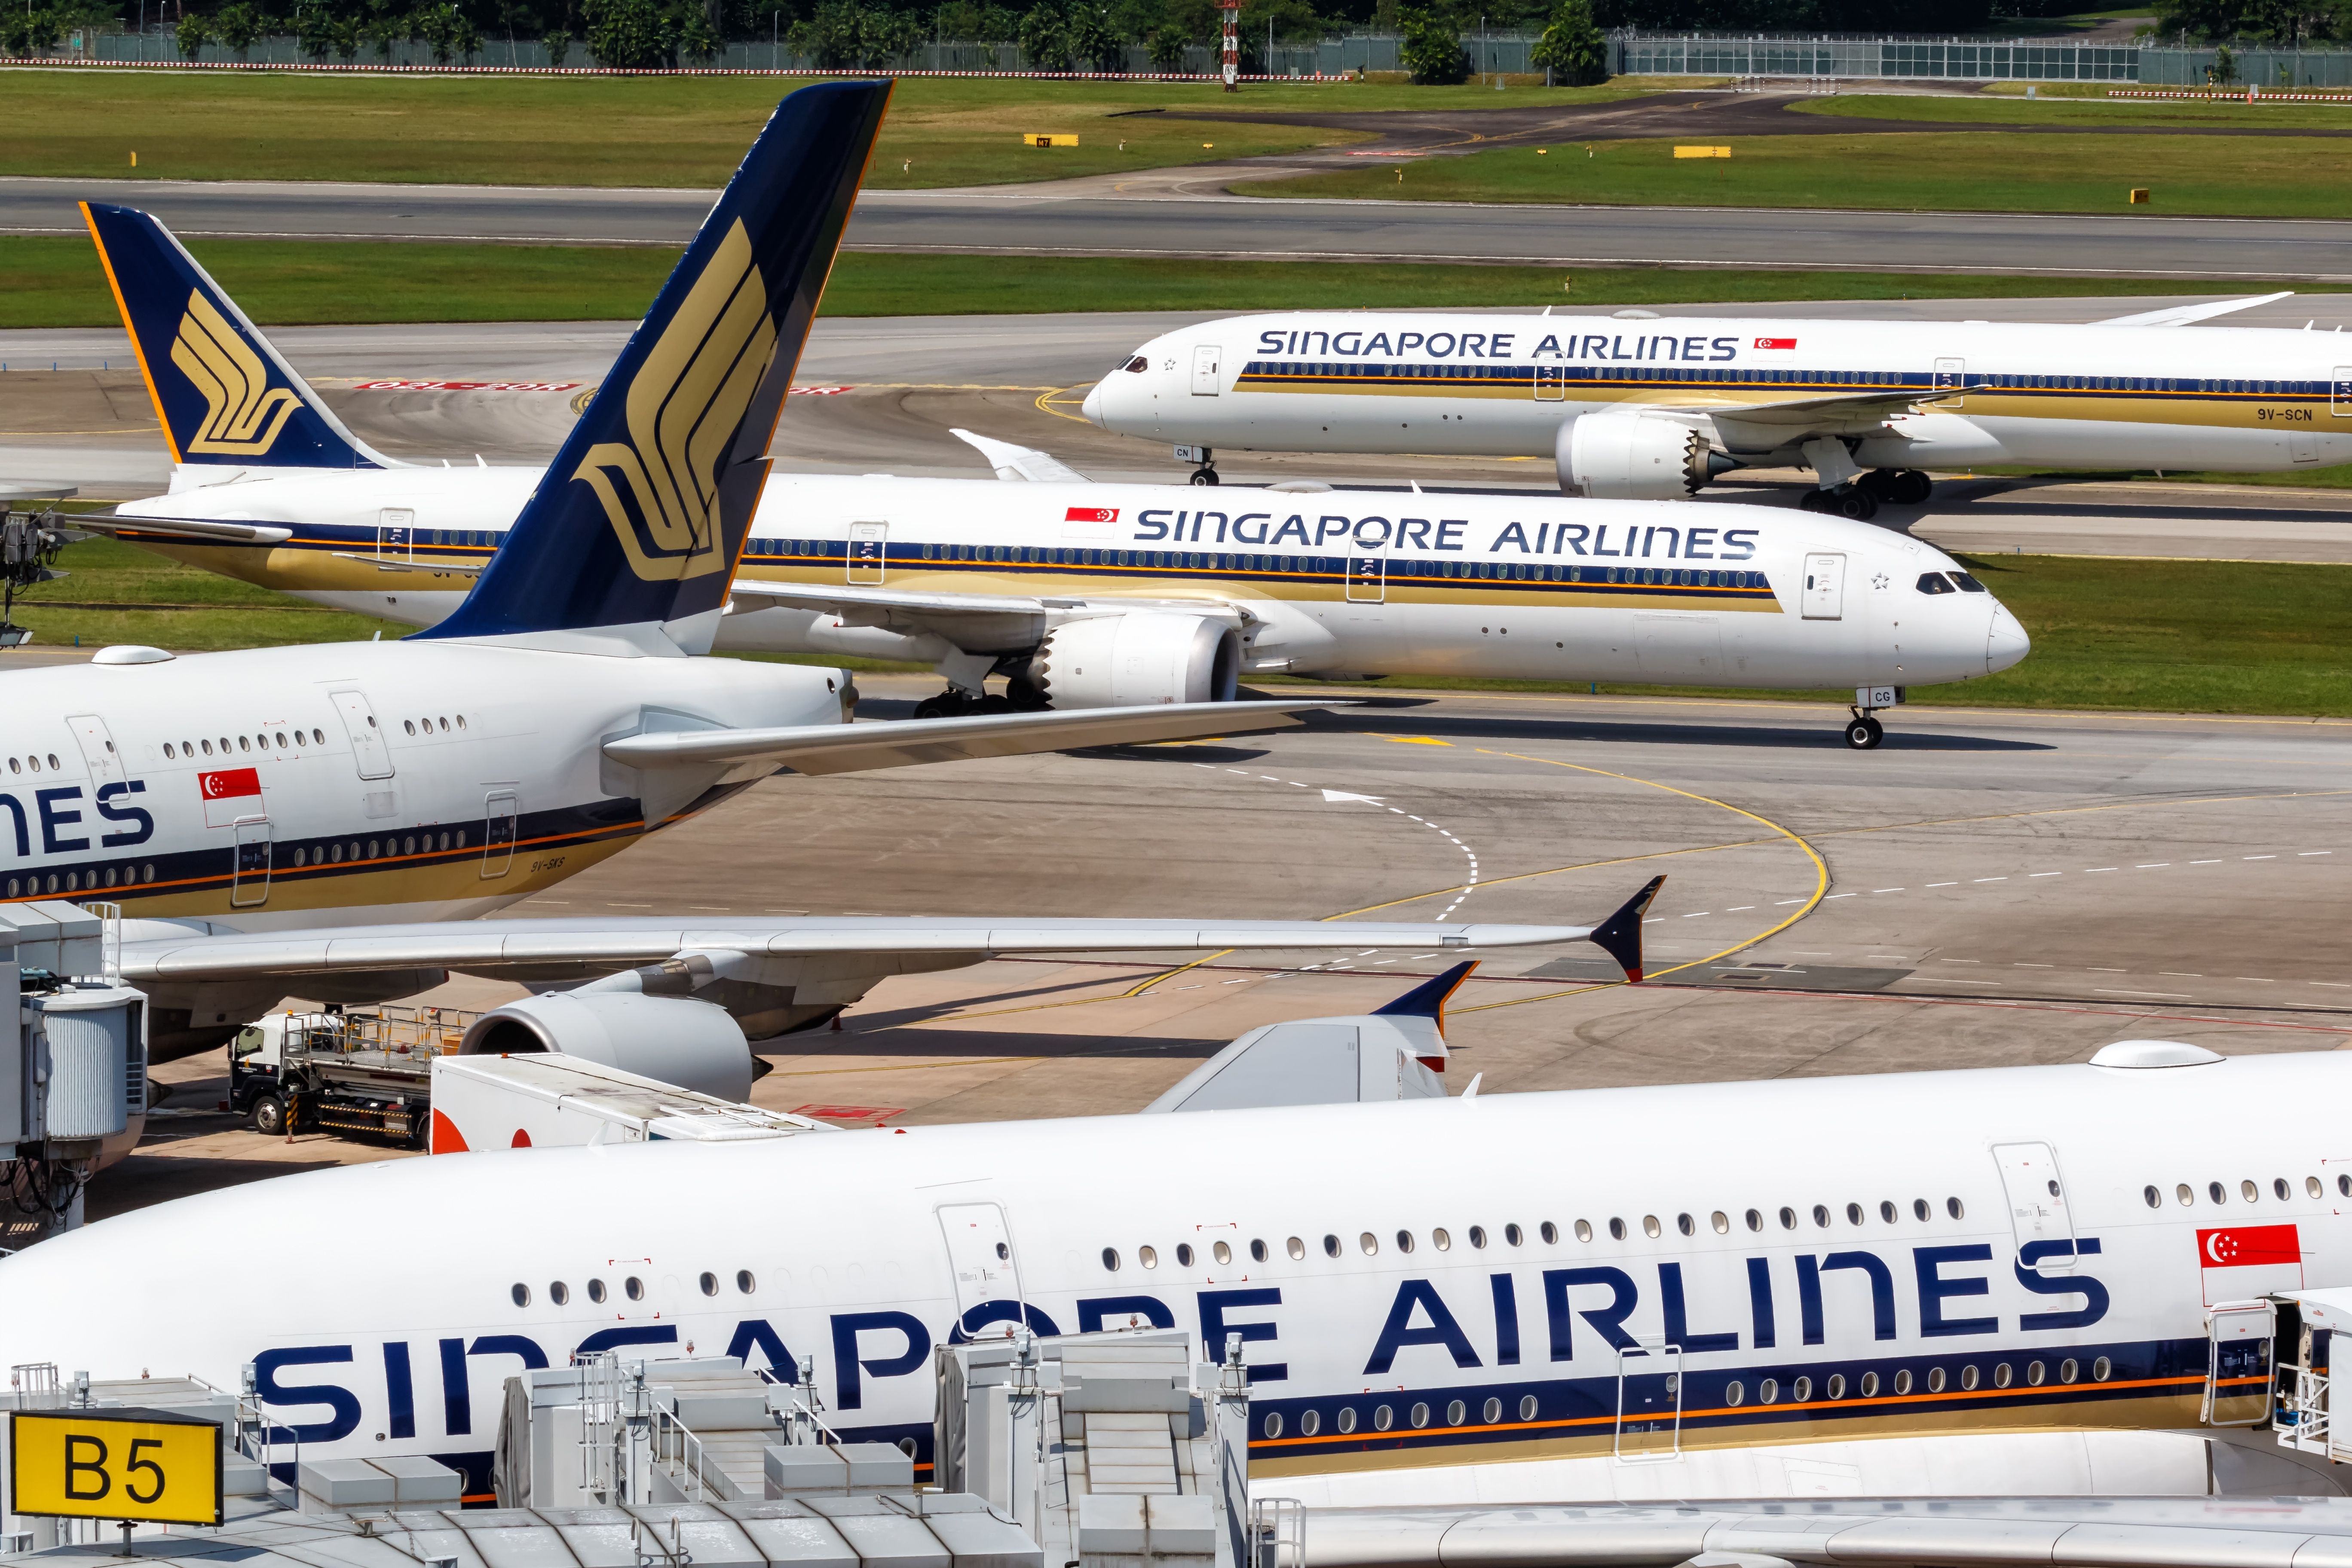 Several Singapore Airlines aircraft parked at Changi Airport